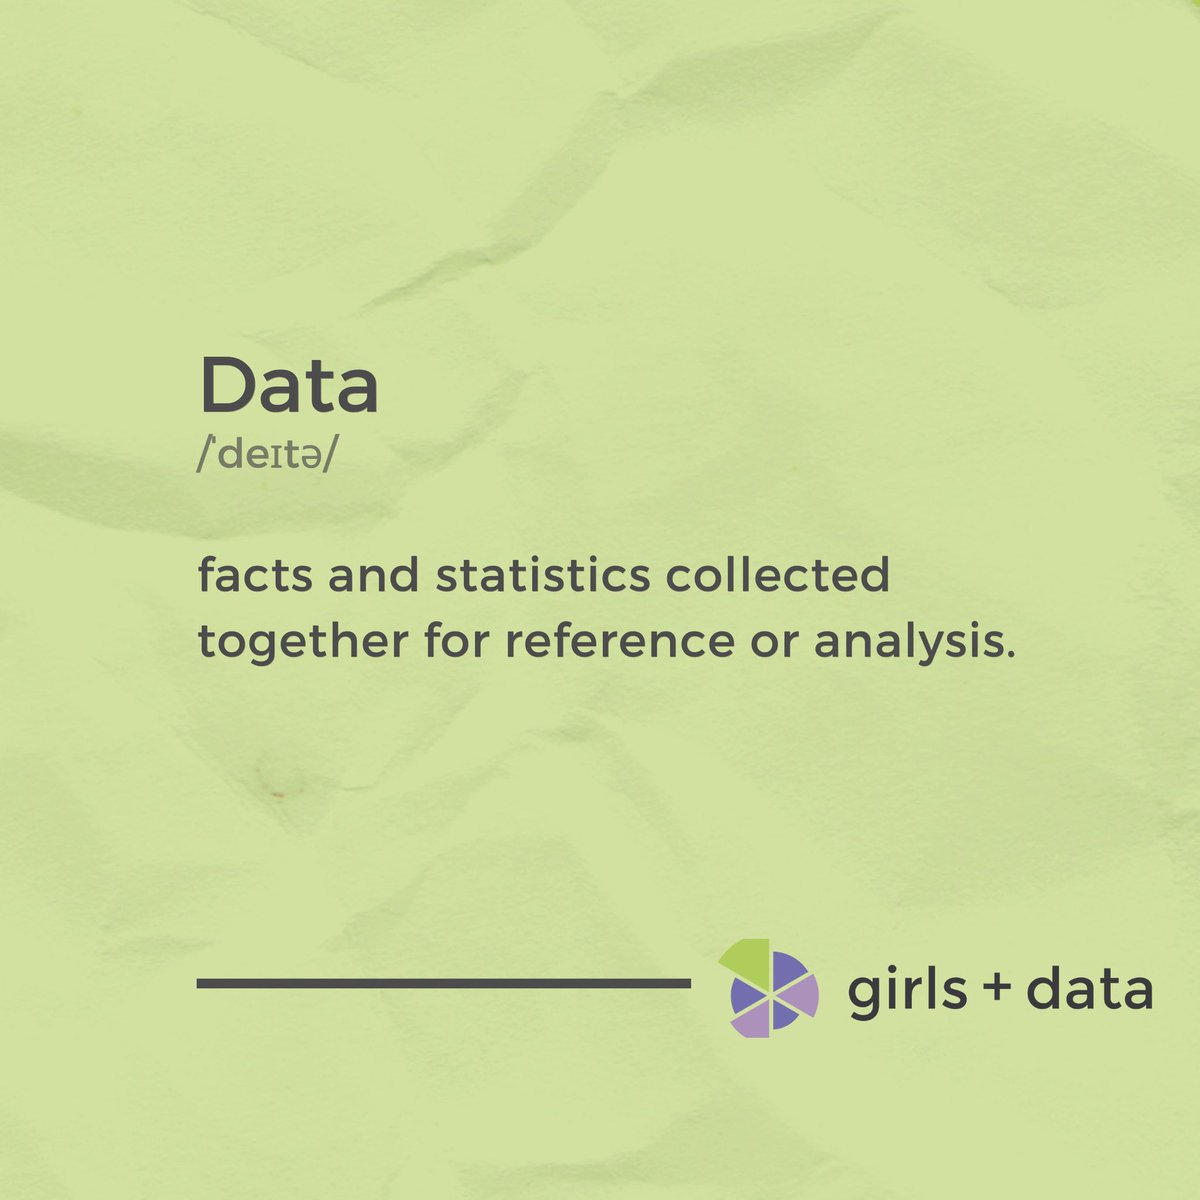 We are here to teach middle school girls to read, reference, and analyze that data in order to open up a world of opportunity for them! #girlsinstem #girlsindata #dataanalyticsjobs